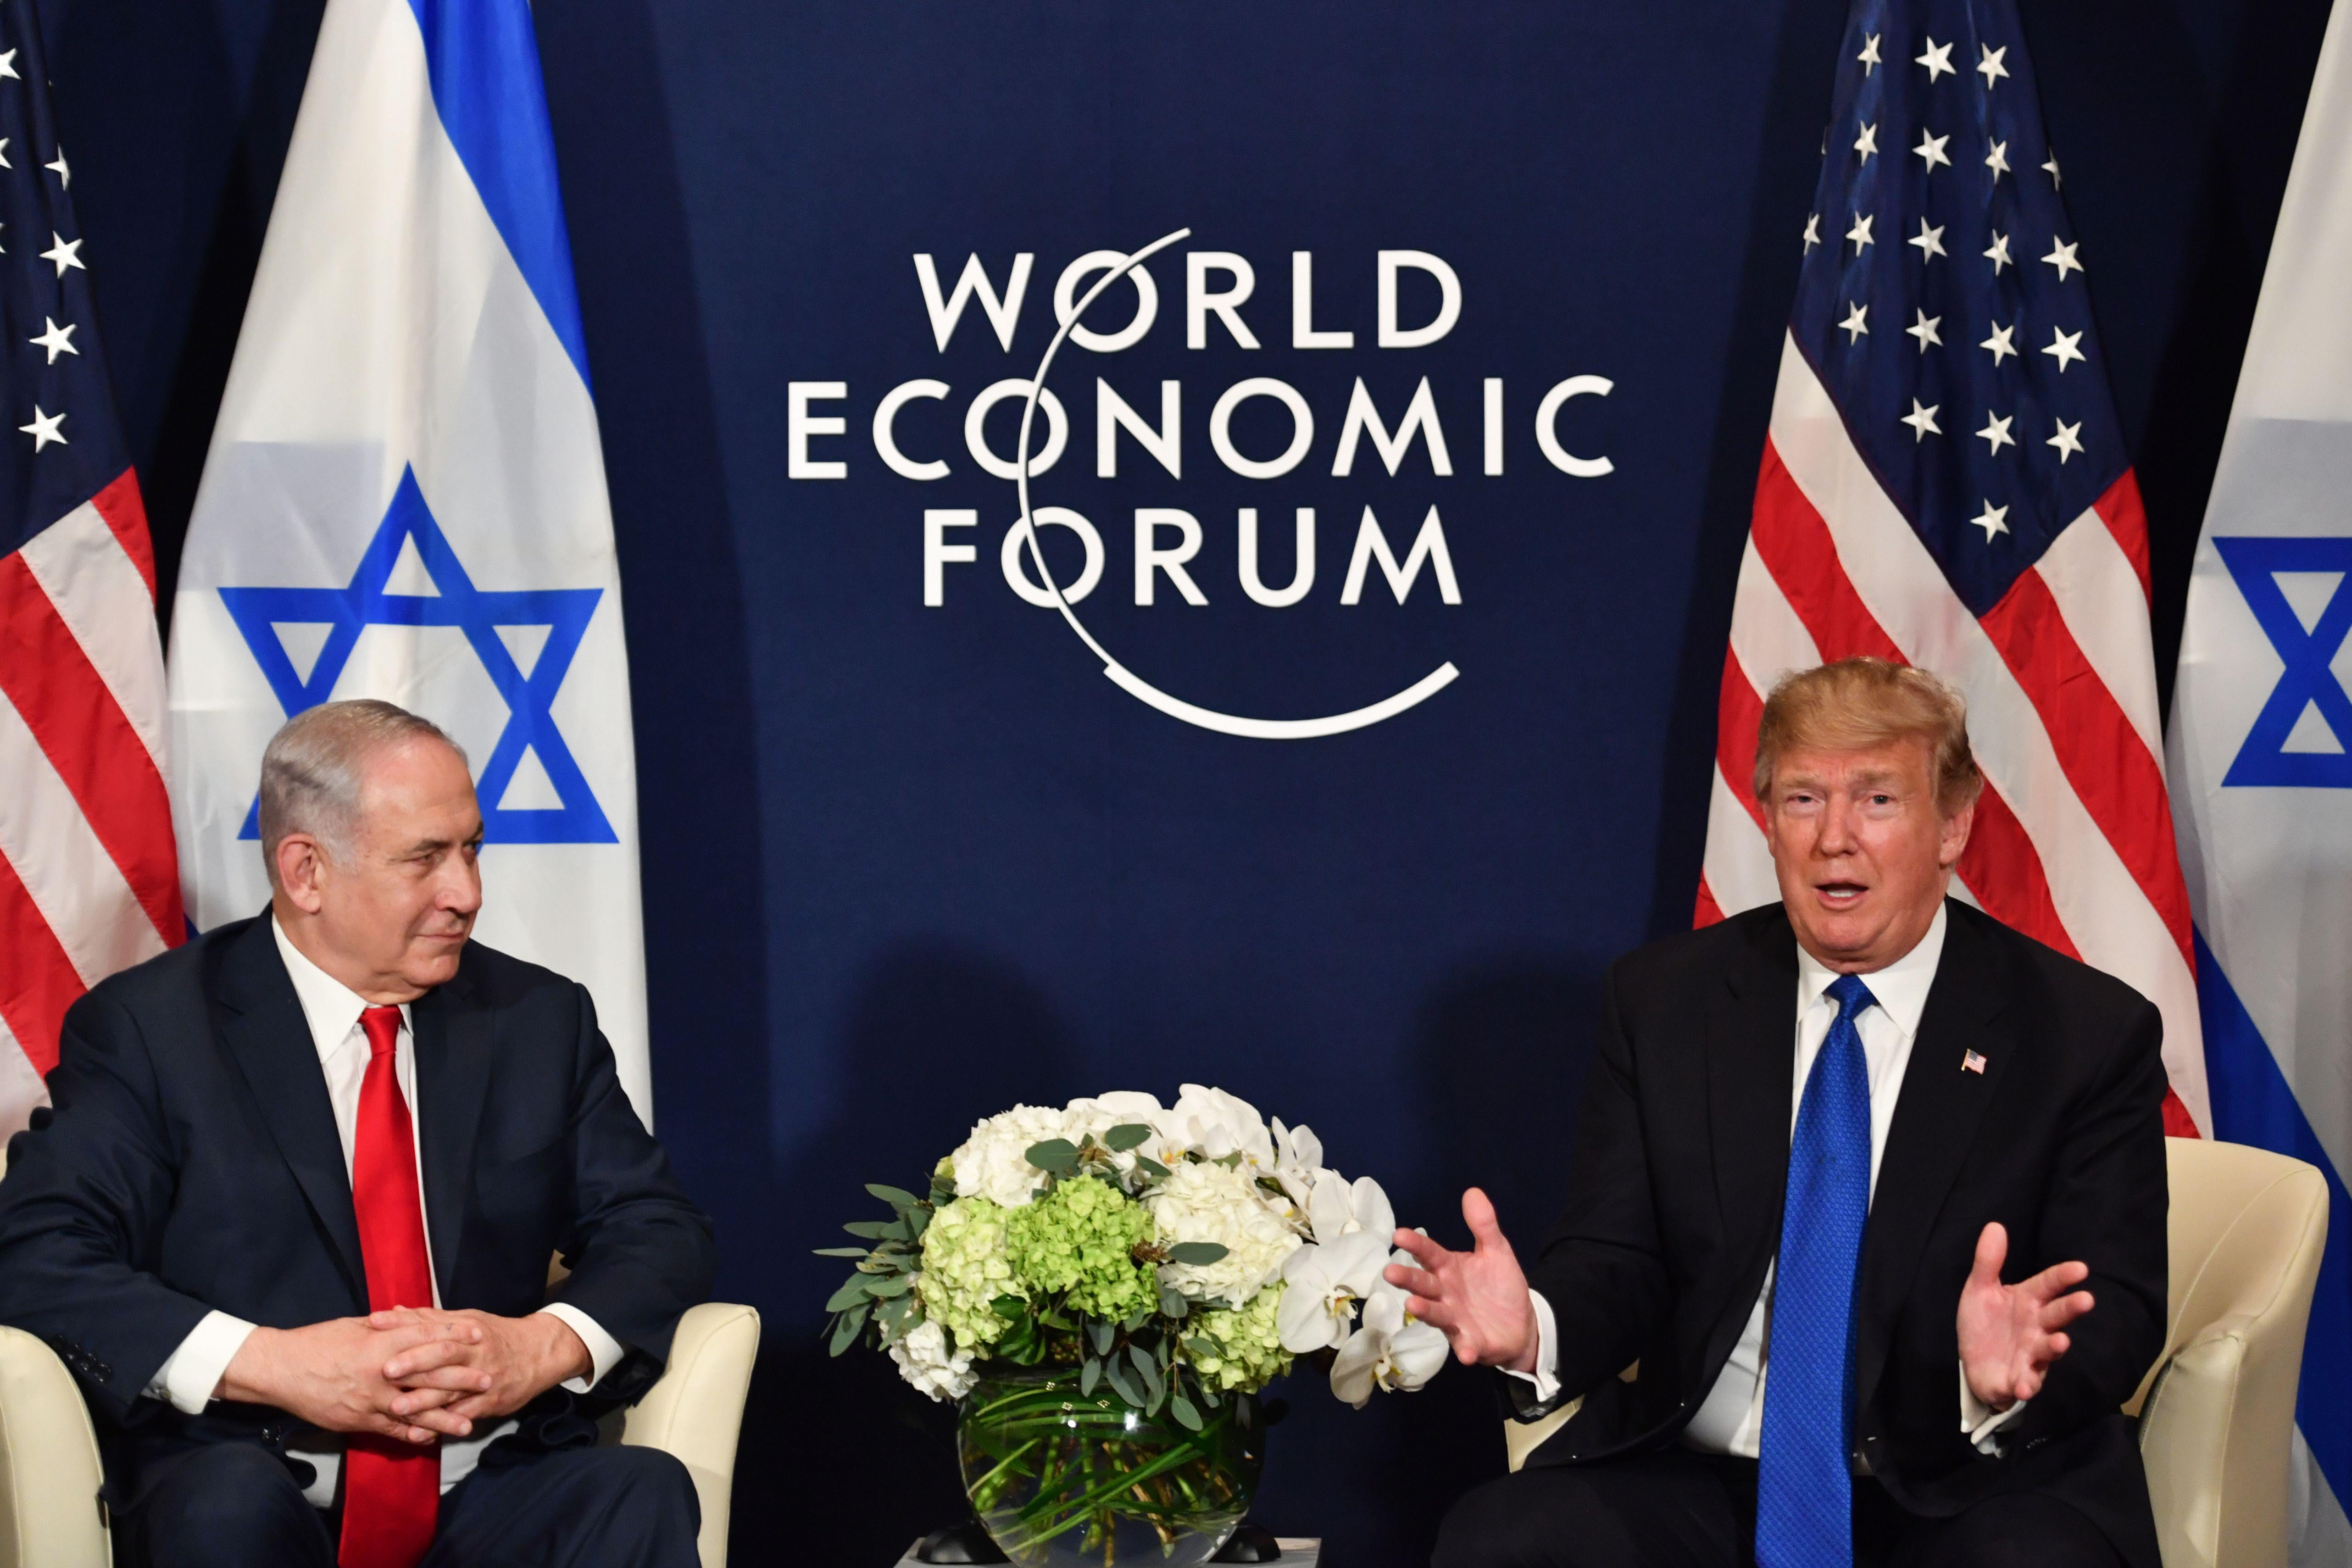 U.S. President Donald Trump (R) speaks with Israel's Prime Minister Benjamin Netanyahu during a bilateral meeting on the sidelines of the World Economic Forum (WEF) annual meeting in Davos, eastern Switzerland, on January 25, 2018. / AFP PHOTO / Nicholas Kamm        (Photo credit should read NICHOLAS KAMM/AFP/Getty Images)